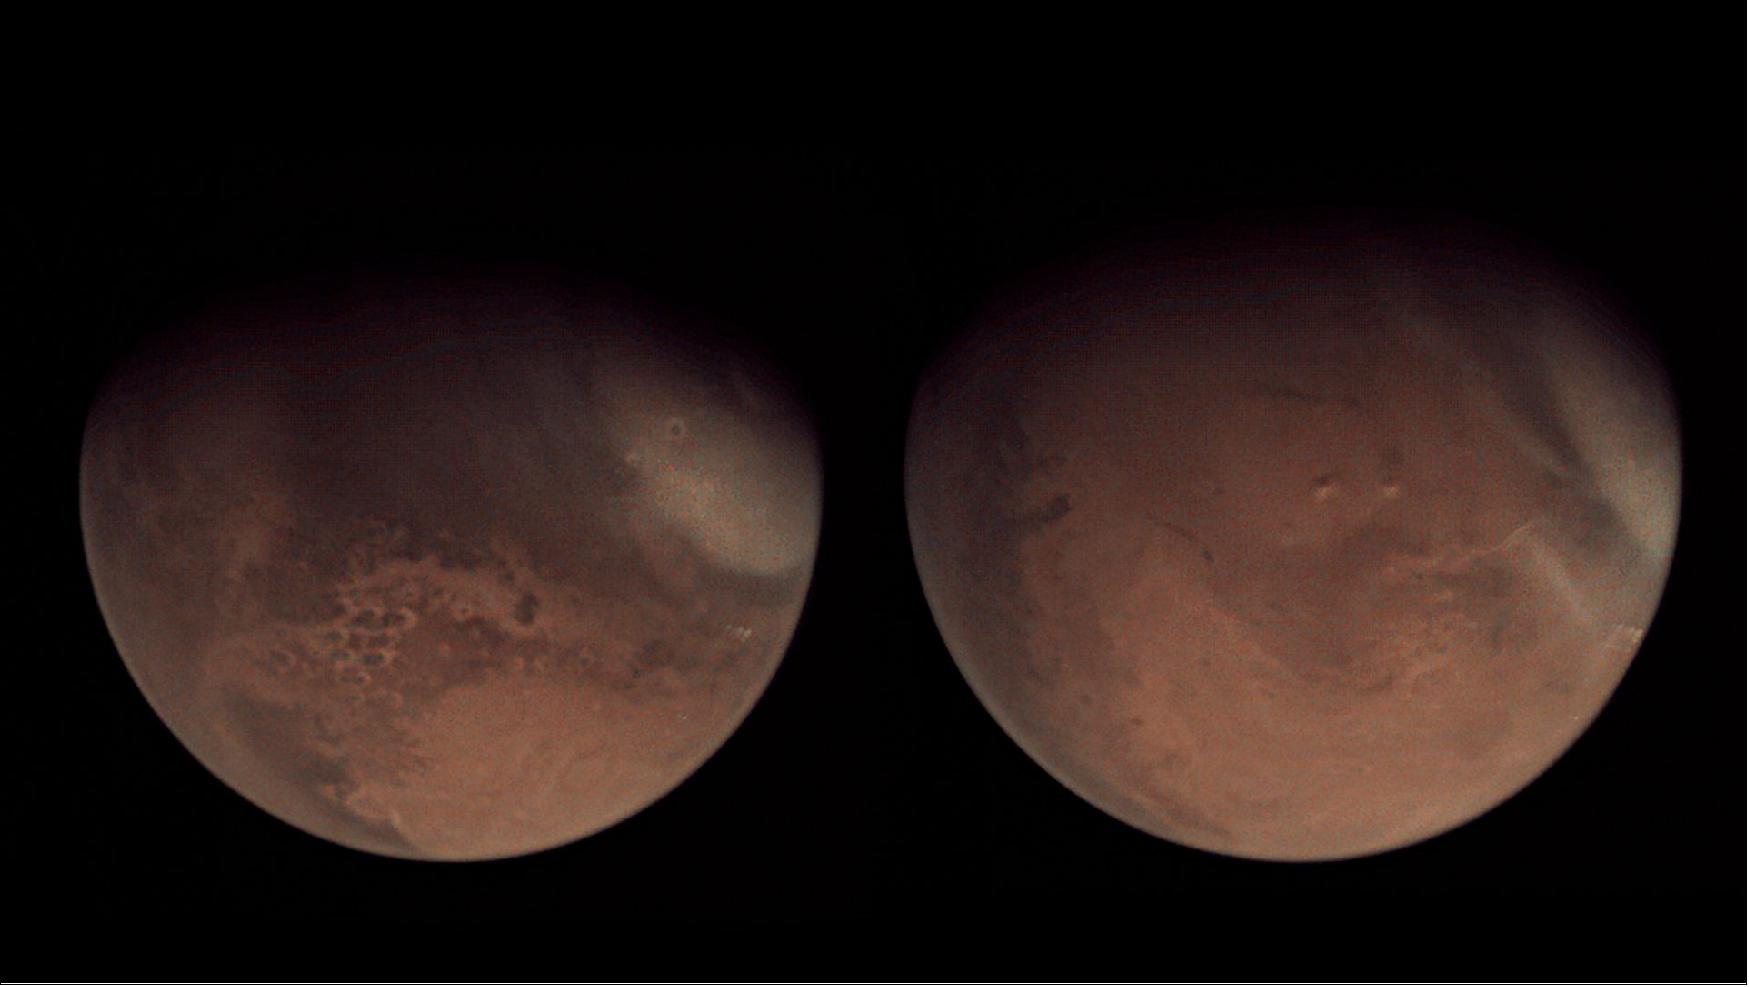 Figure 57: The image on the left was taken on 6 February and the image on the right on 7 February – one of the first images returned from the new martian year. The images were captured by the Visual Monitoring Camera onboard ESA’s Mars Express, which takes regular snapshots of the planet from orbit. The images are automatically shared to the camera’s Twitter account and posted to Flickr. One year on Mars equals 687 Earth days, so it takes almost twice as long to orbit the Sun. Your birthday would instead be every 23 Earth months! The martian new year begins with the northward equinox (northern spring, southern autumn) and the coming year is designated Mars Year 36 (image credit: ESA, CC BY-SA 3.0 IGO)